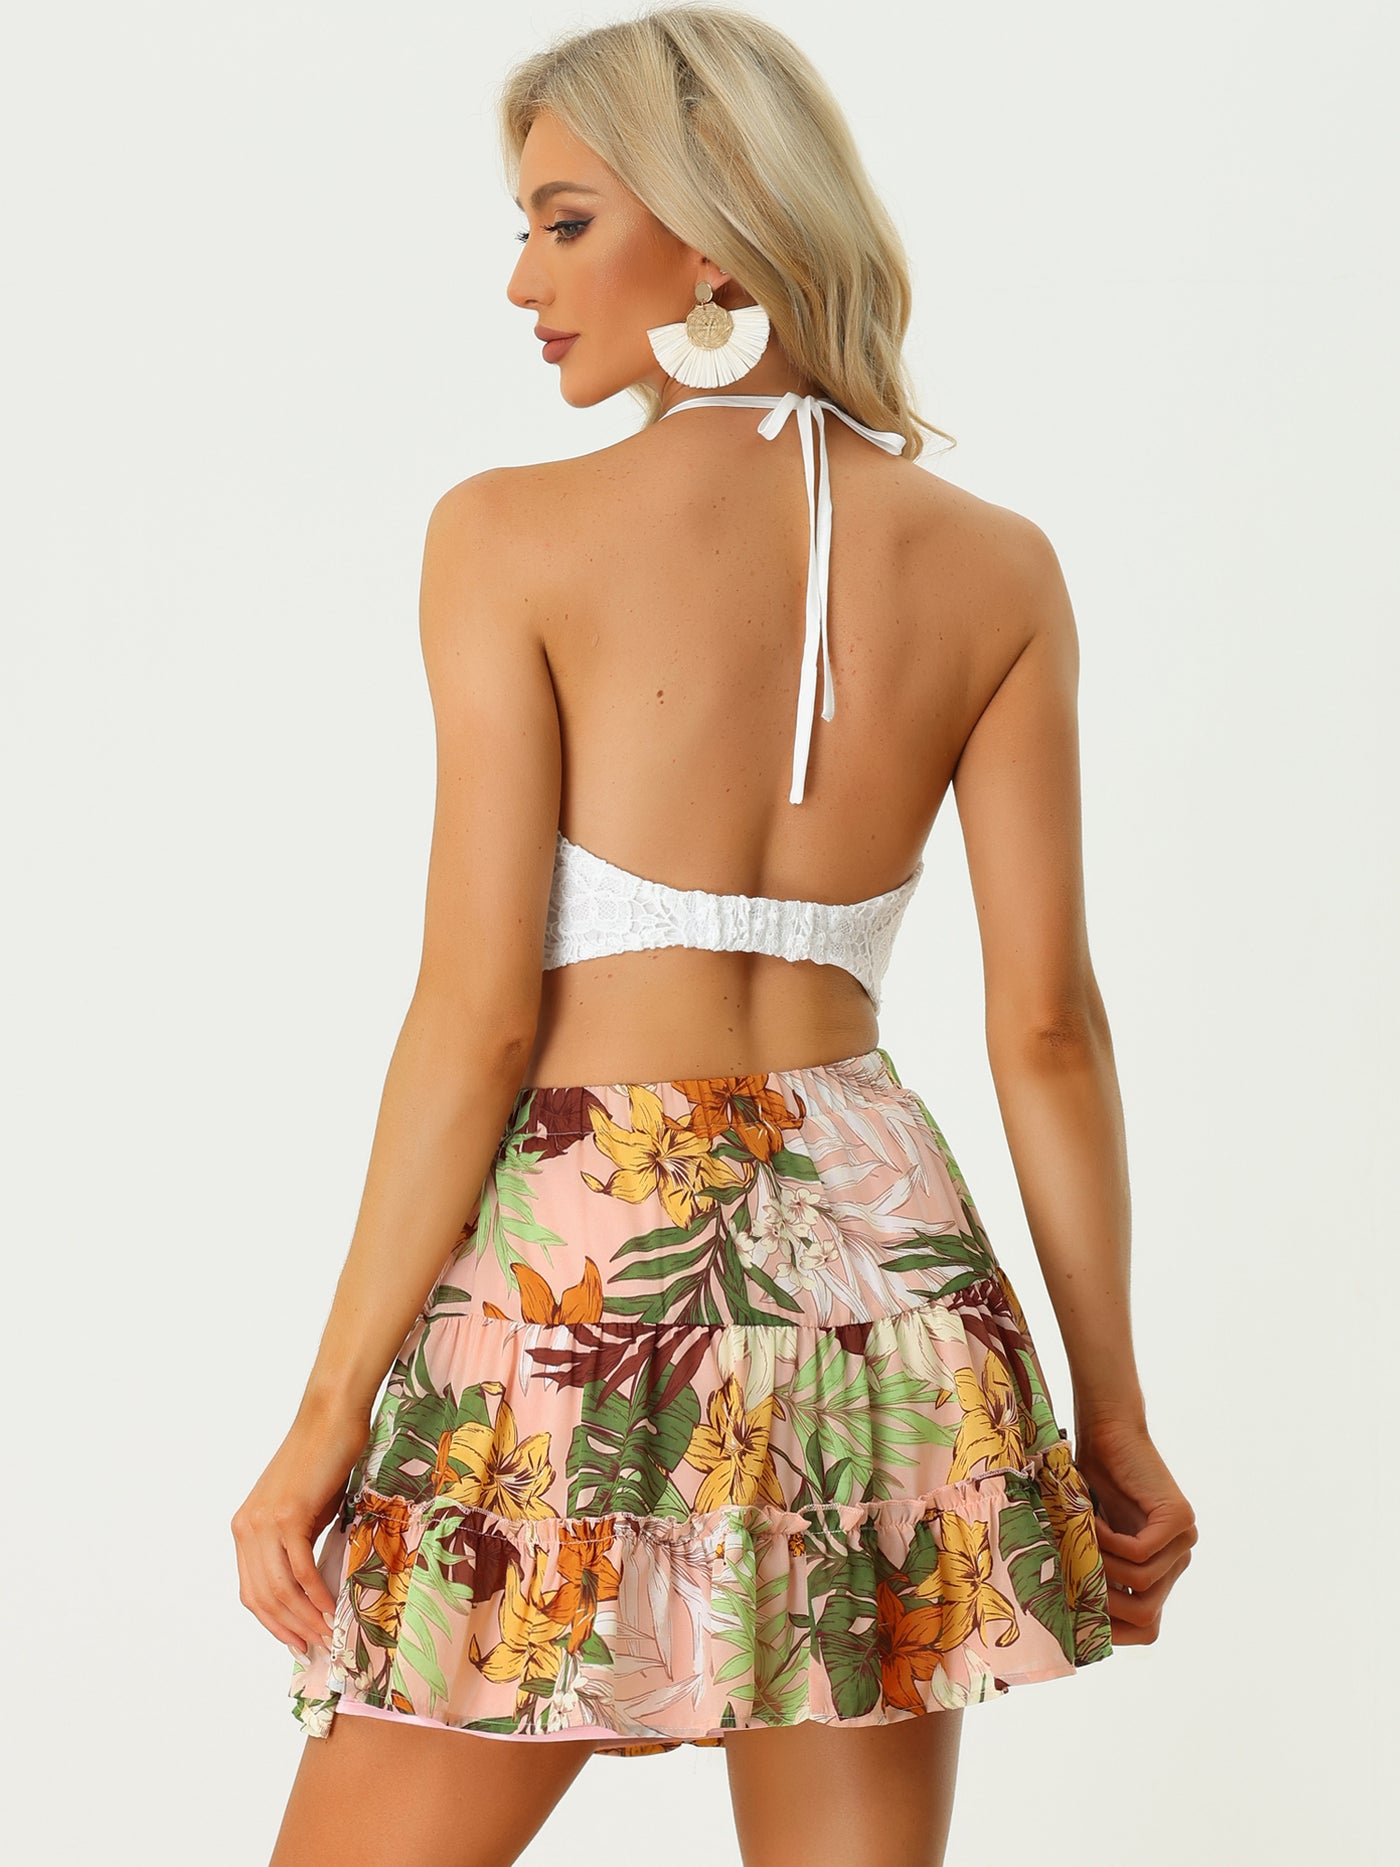 Allegra K 2 Piece Outfits Halter Lace Crop Top with Tropical Mini Skirt Set